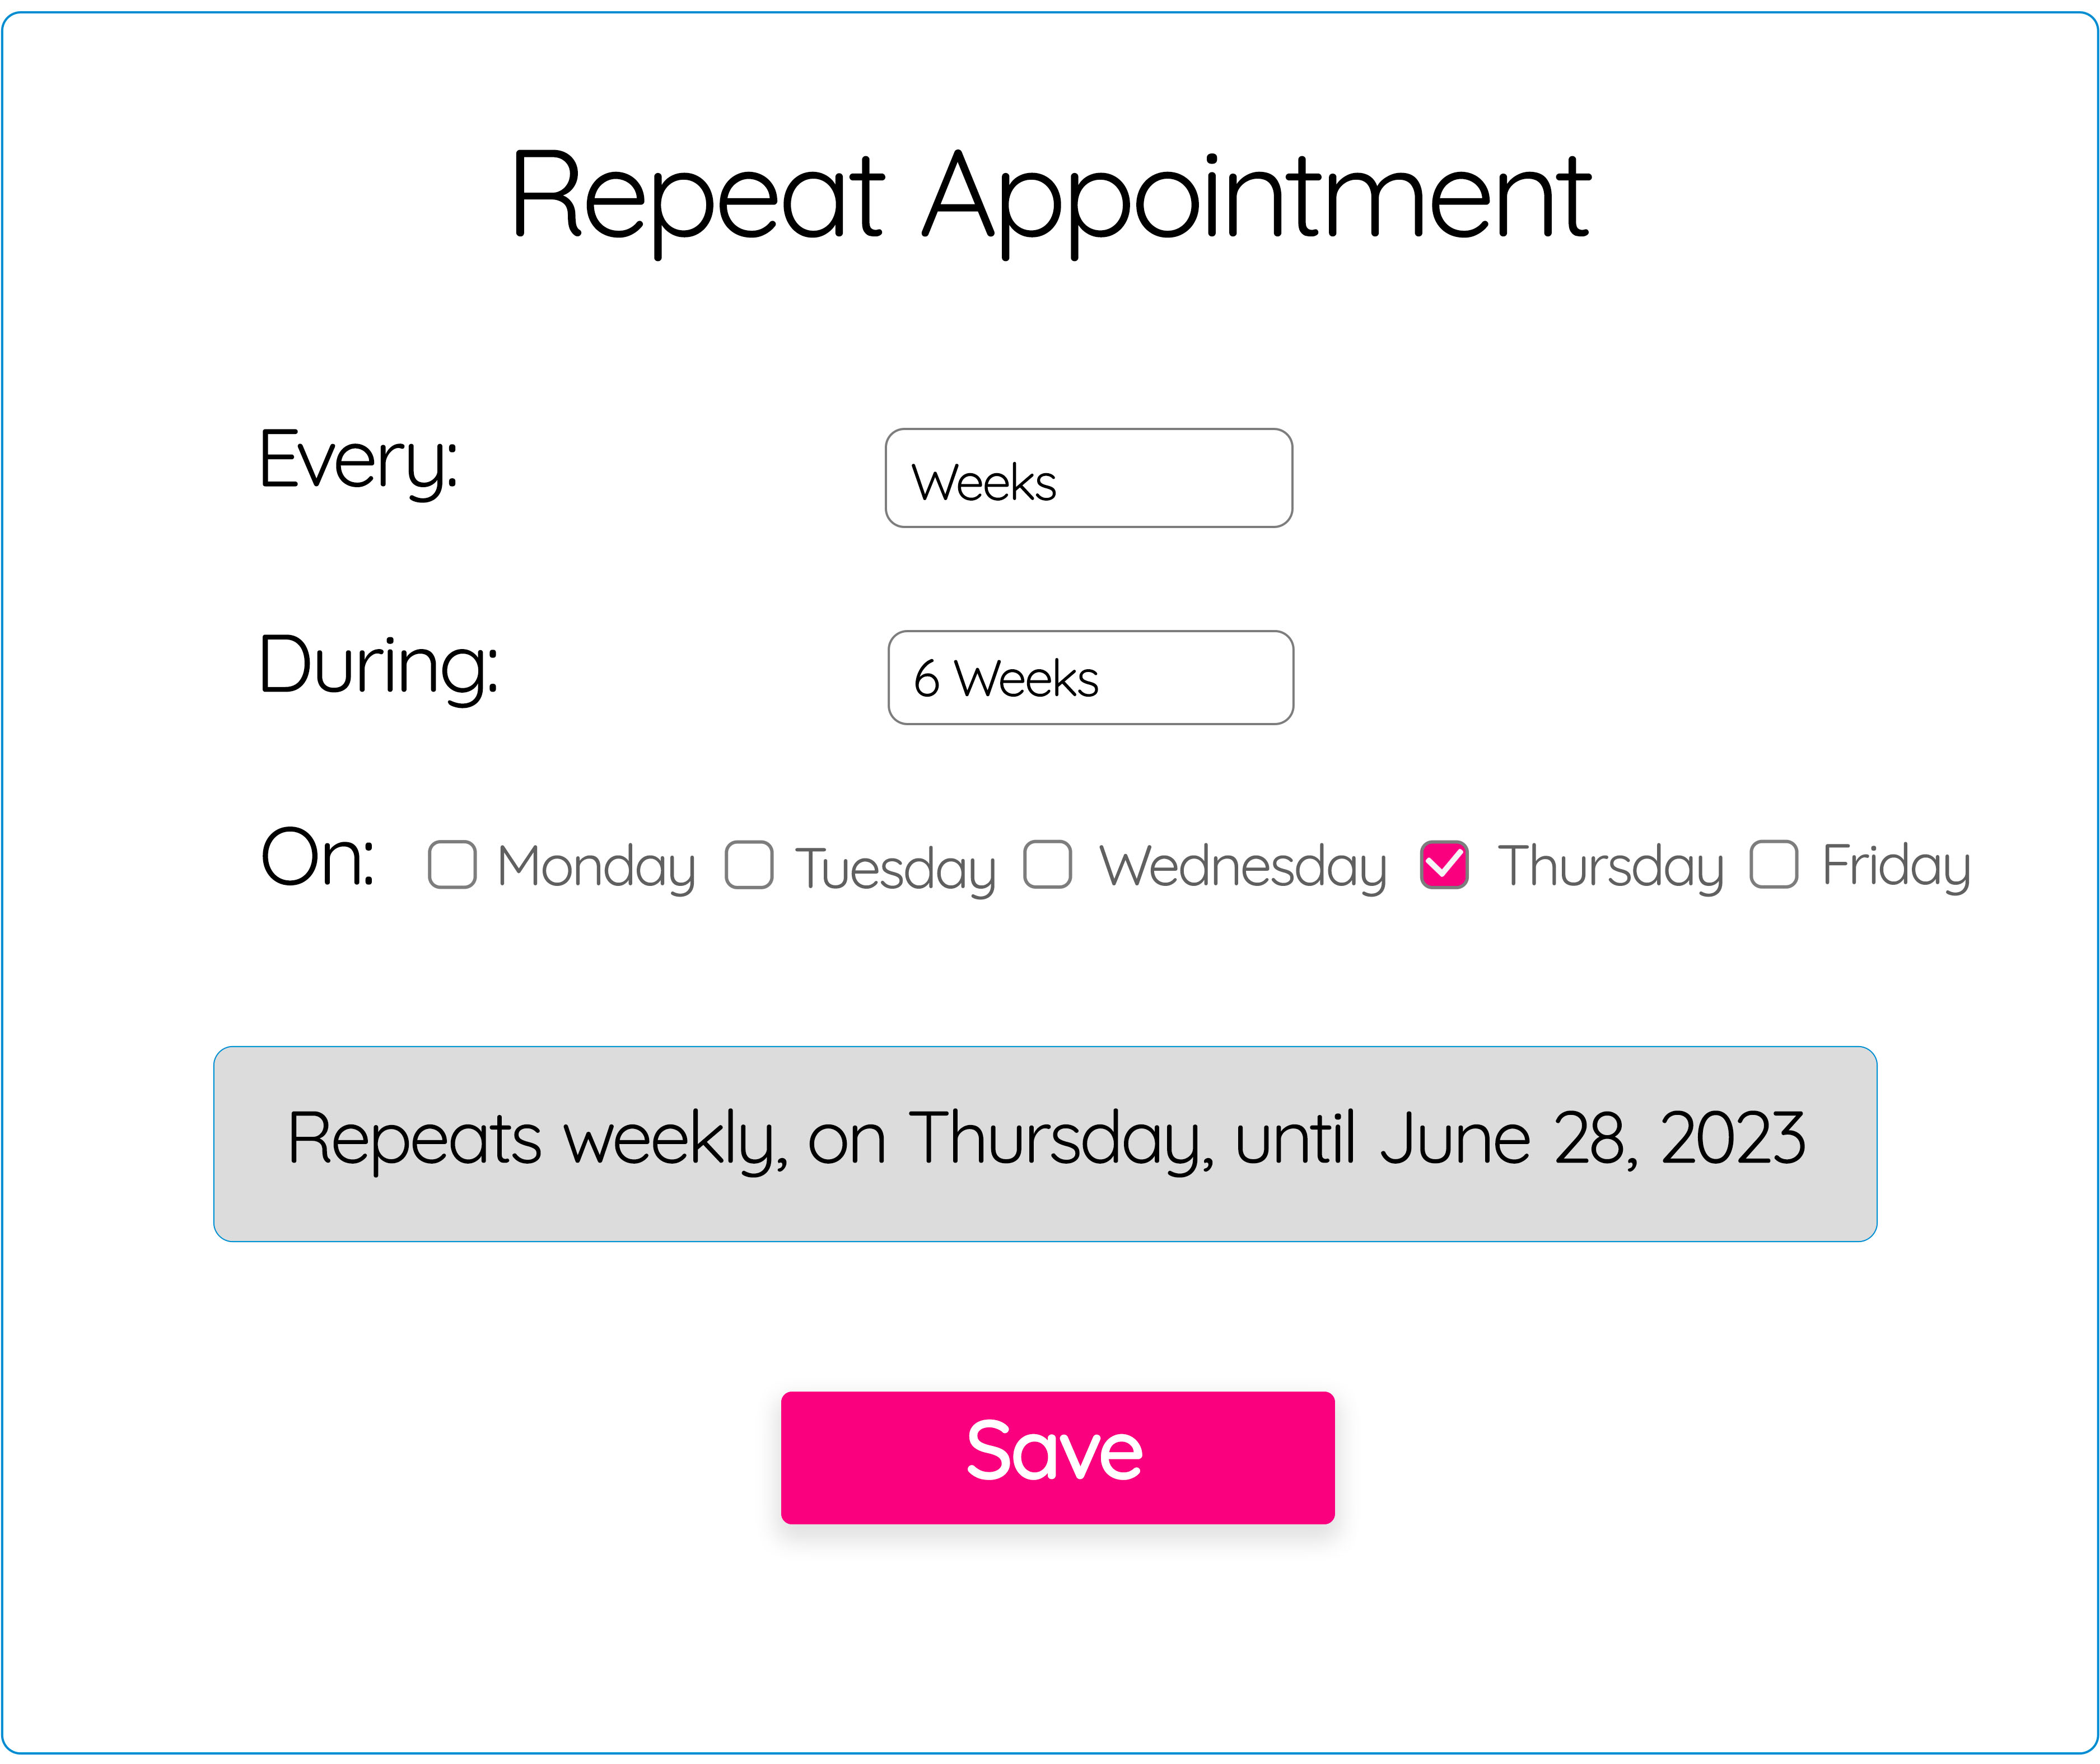 GOrendezvous' recurring appointment settings window